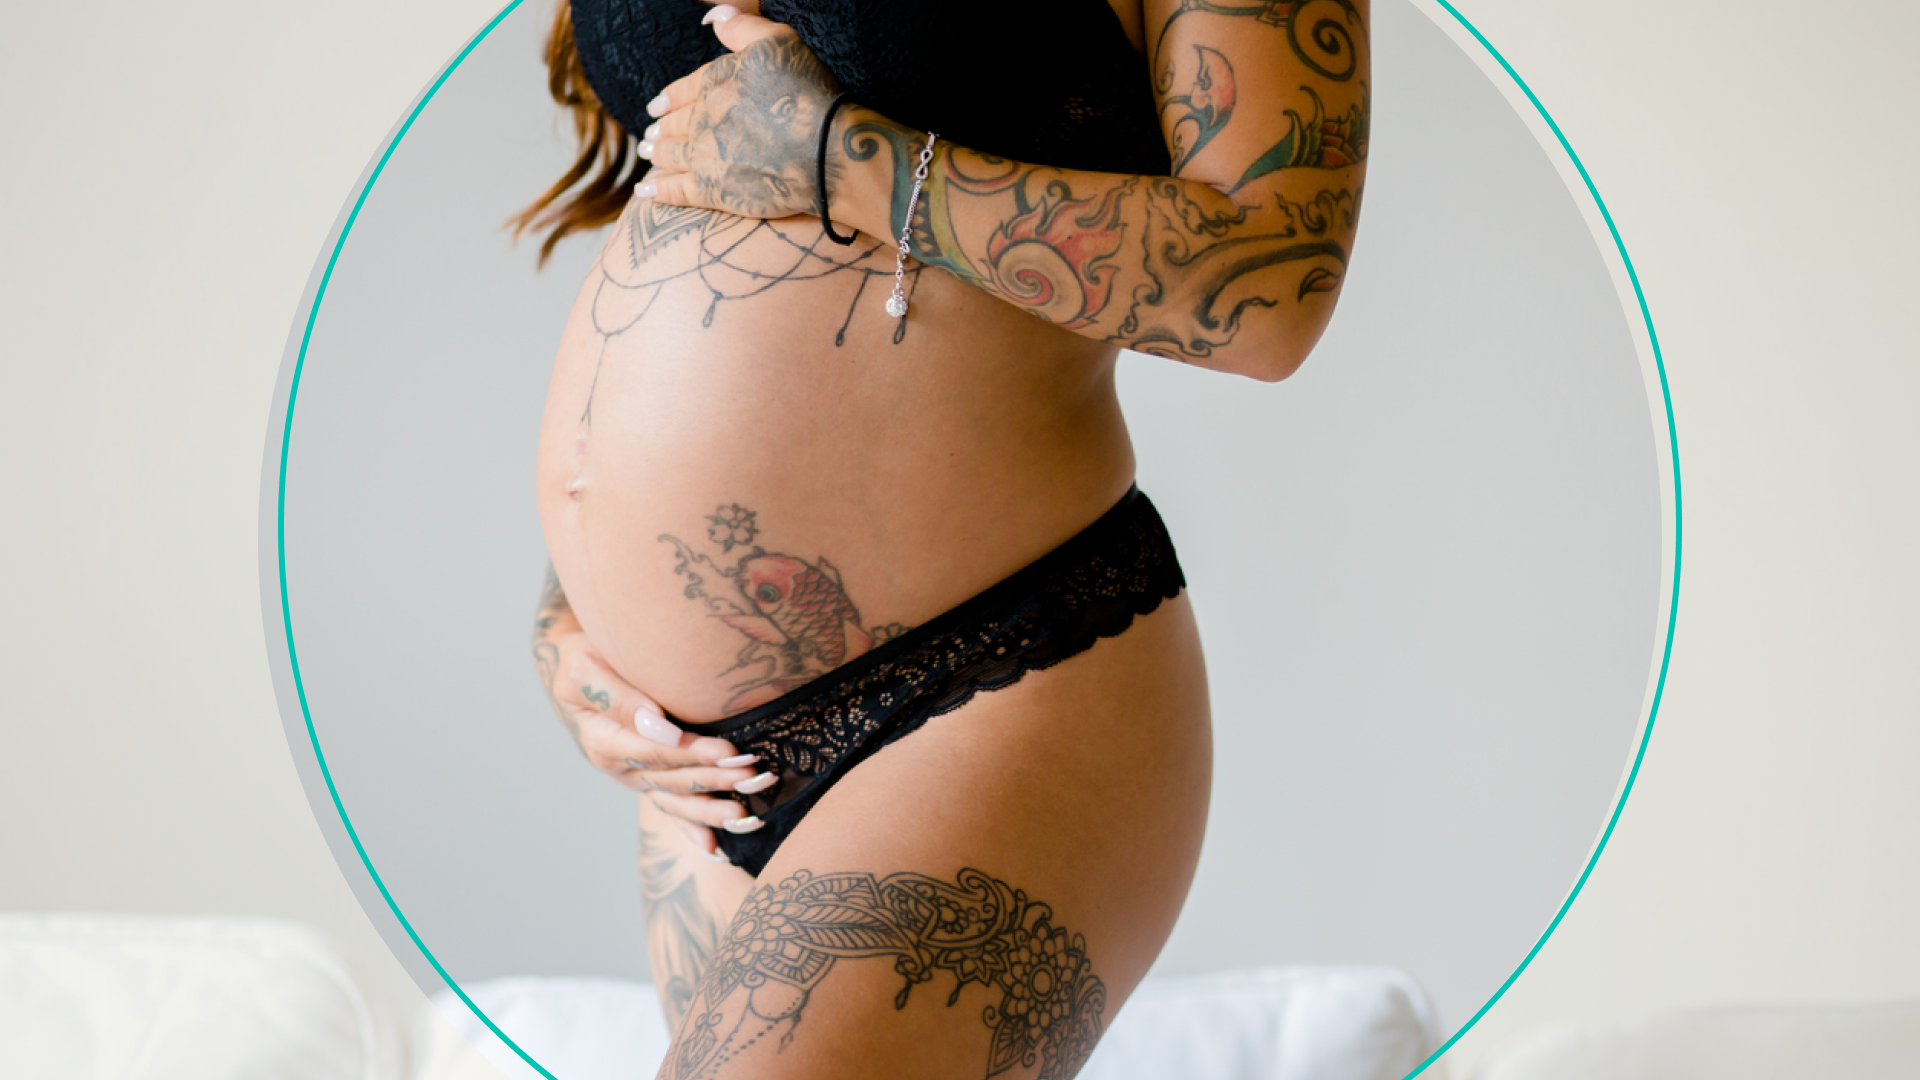 Pregnant Woman With Tattoos